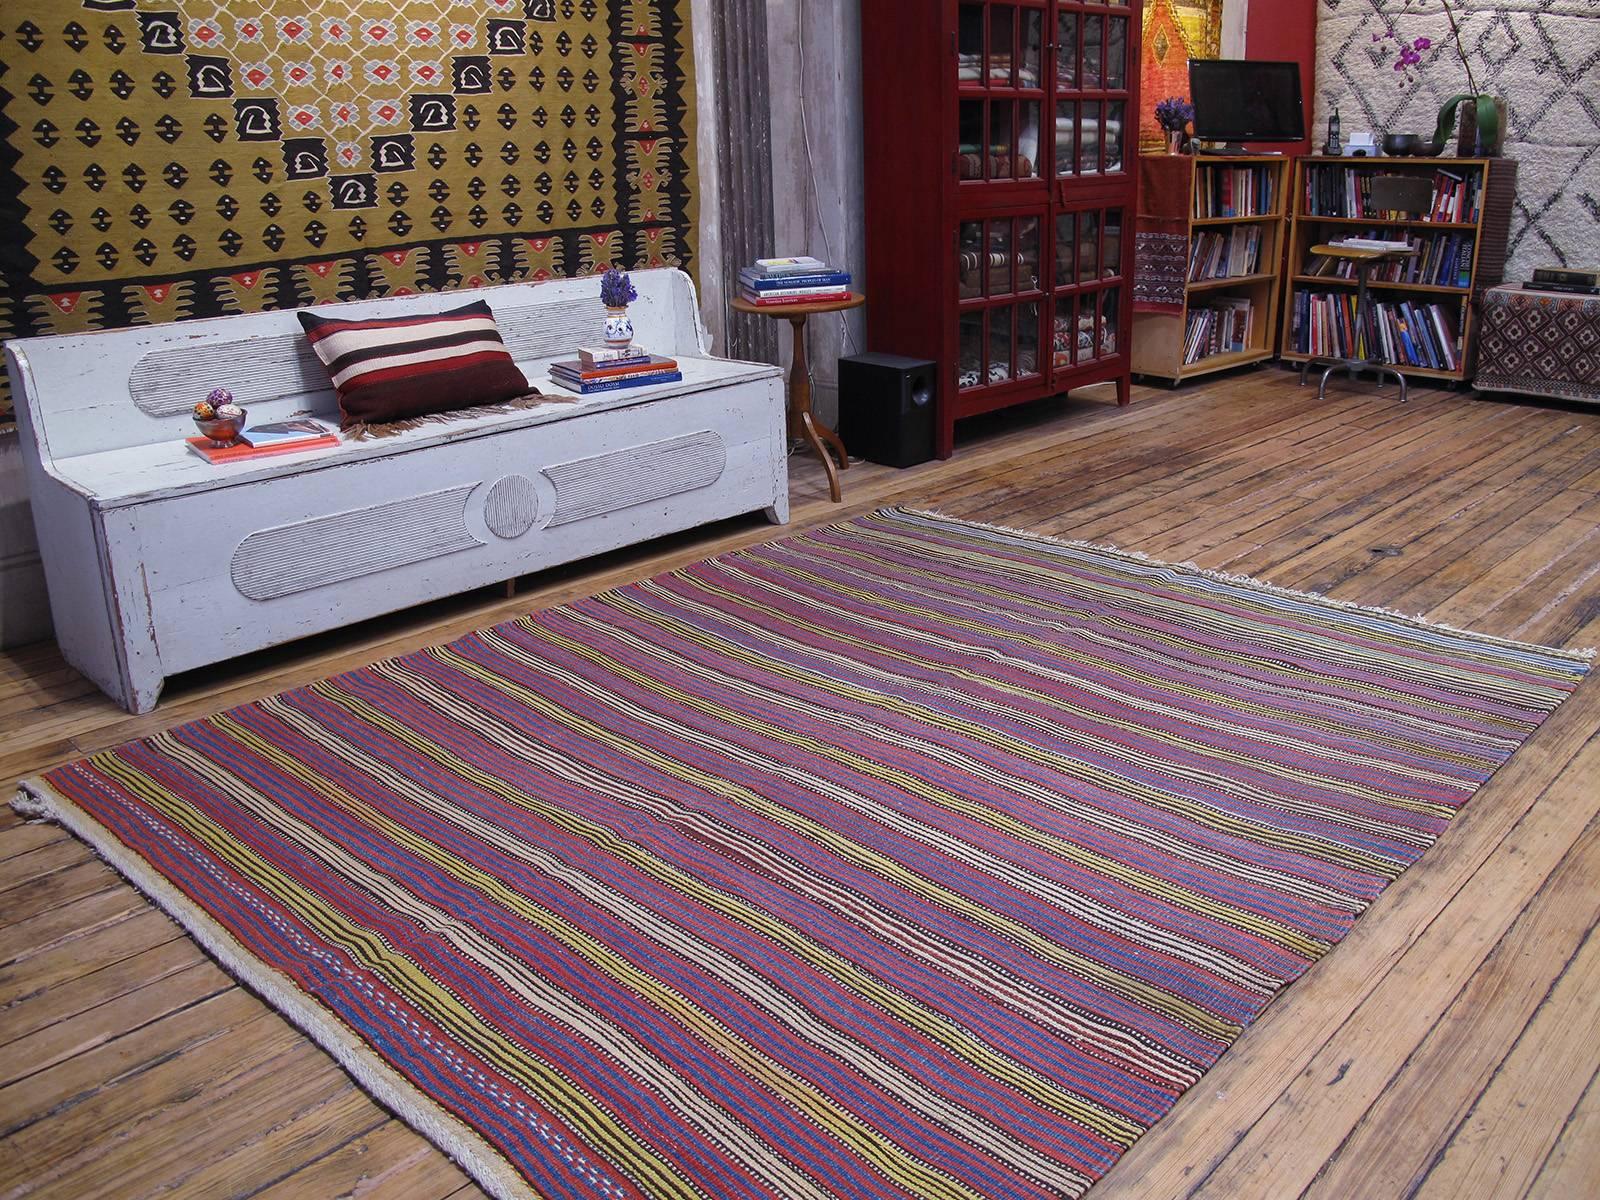 Antique Erzurum Kilim rug. A rare antique flat-weave rug from Northeastern Turkey with a stripe pattern in brilliant natural dyes. Rug is a very high quality weaving, in near perfect state of preservation, with great modern appeal, despite its age.